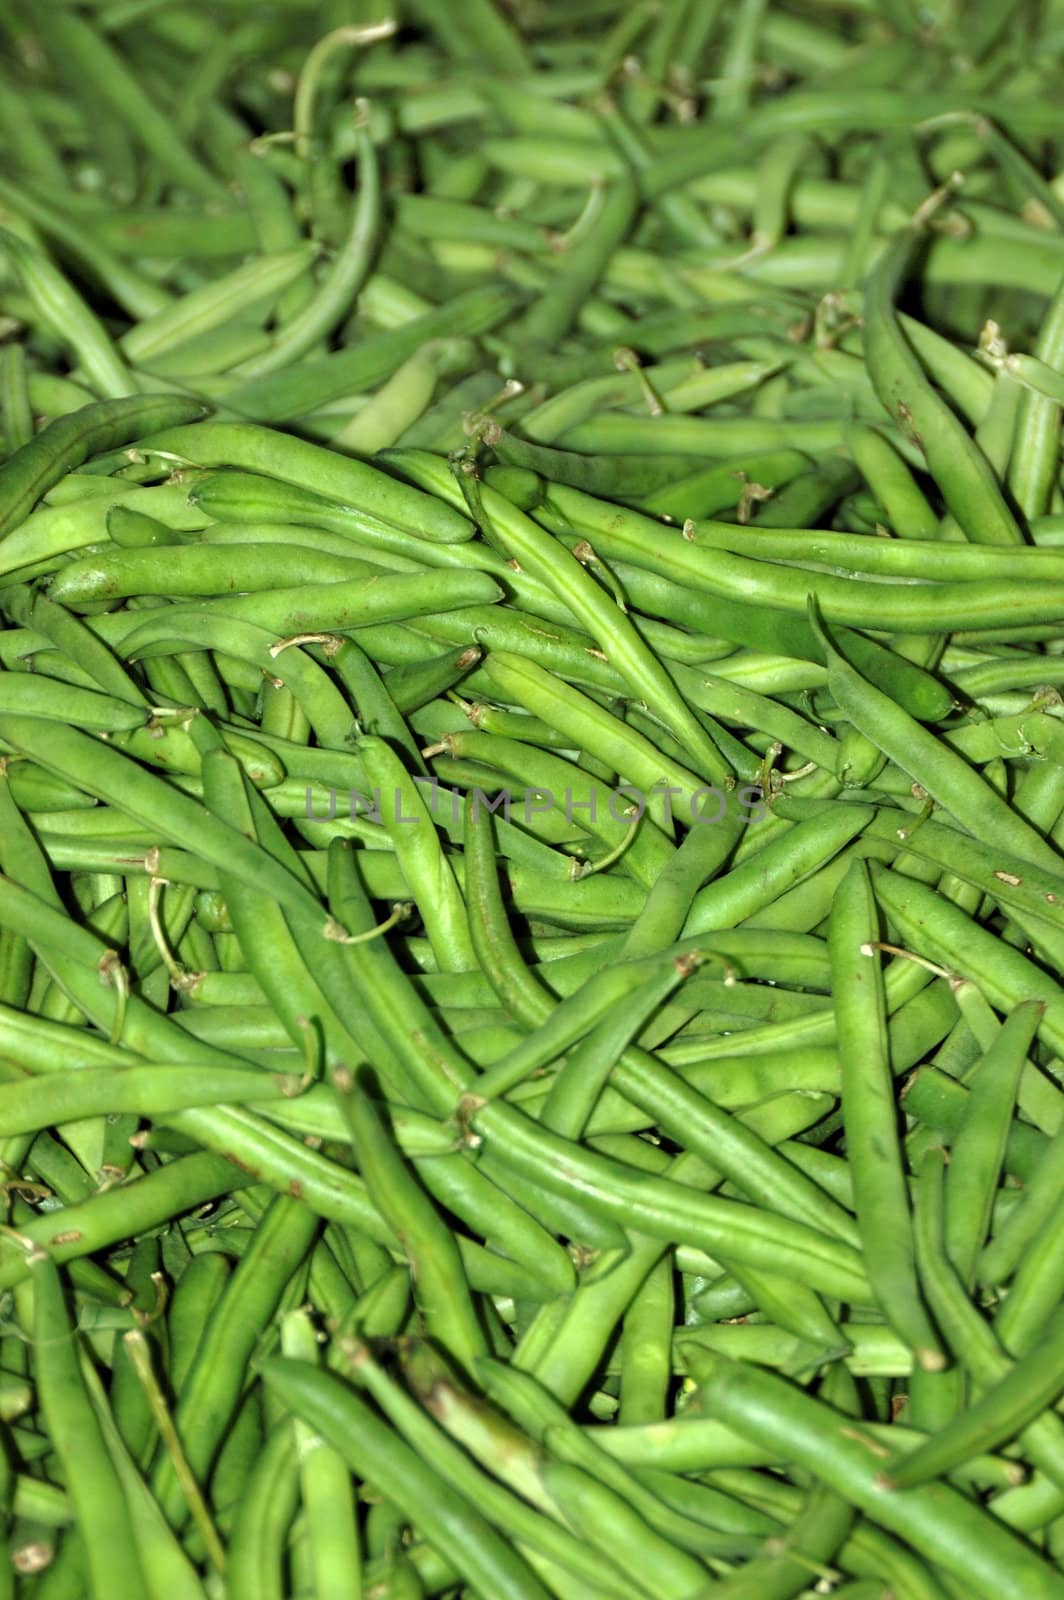 Freshly picked green beans ready for sale